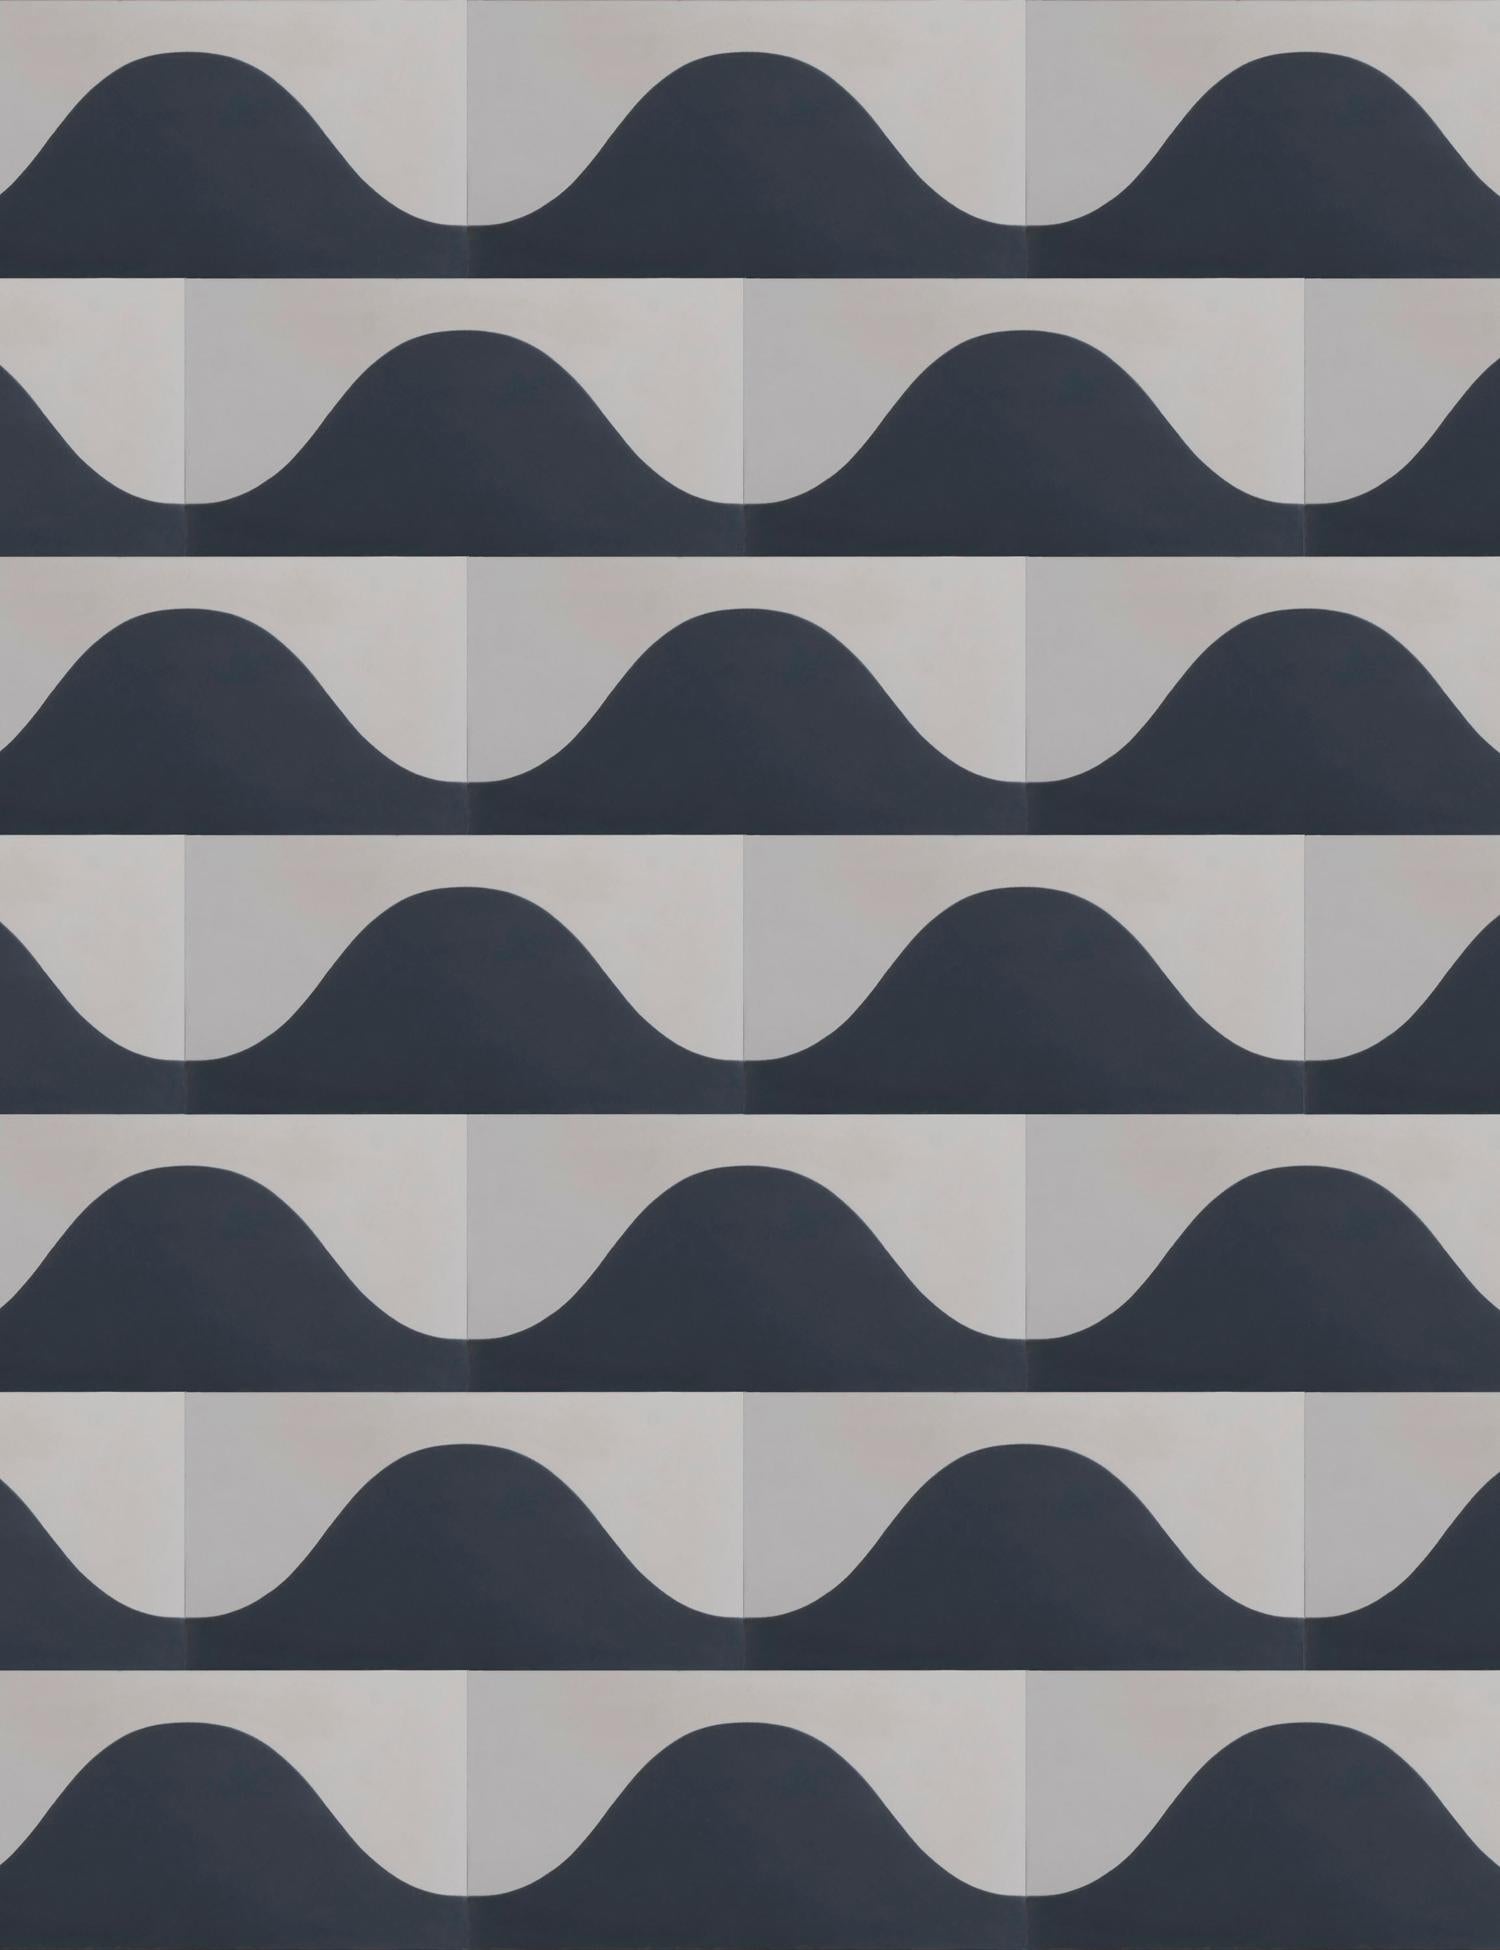 A wavy modular retro pattern that can be mixed and matched to create a dual-color or ombré pattern. 

Price listed is for an in stock tile sample. For an order quote including freight, please message with the quantity needed before overage and the